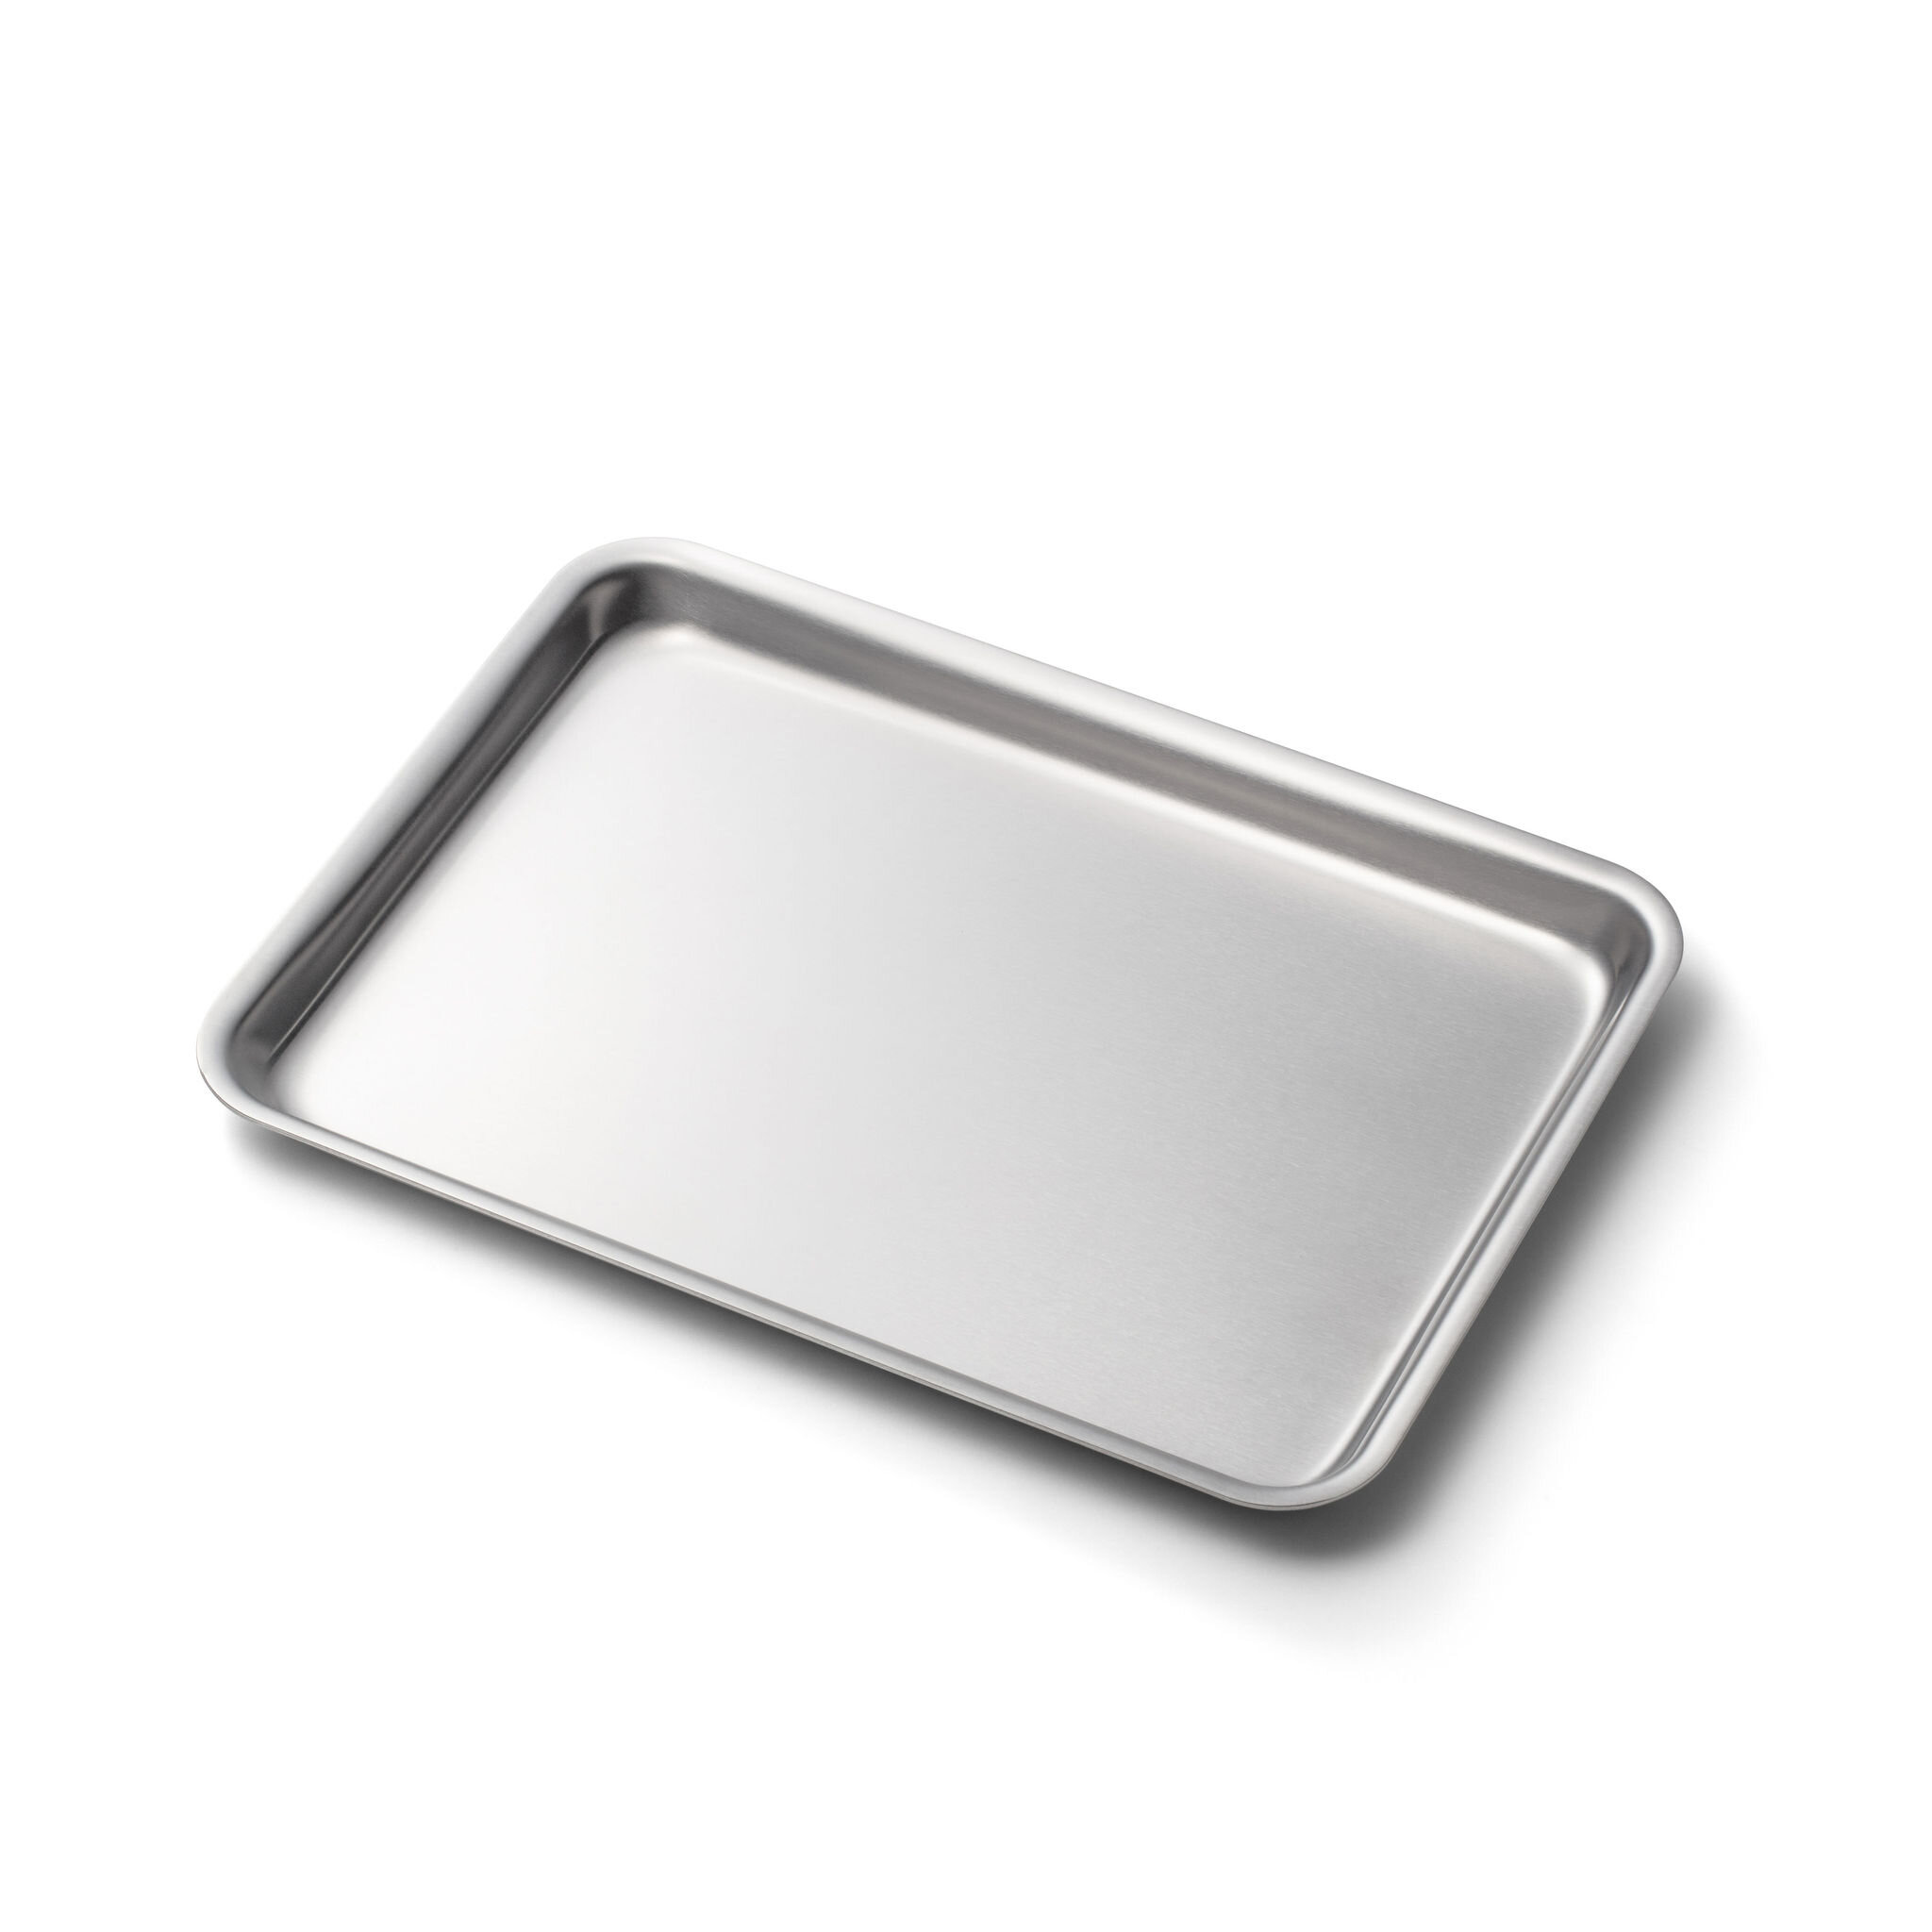 All-Clad D3 Stainless Jelly Roll Pan Bakeware Review - Consumer Reports